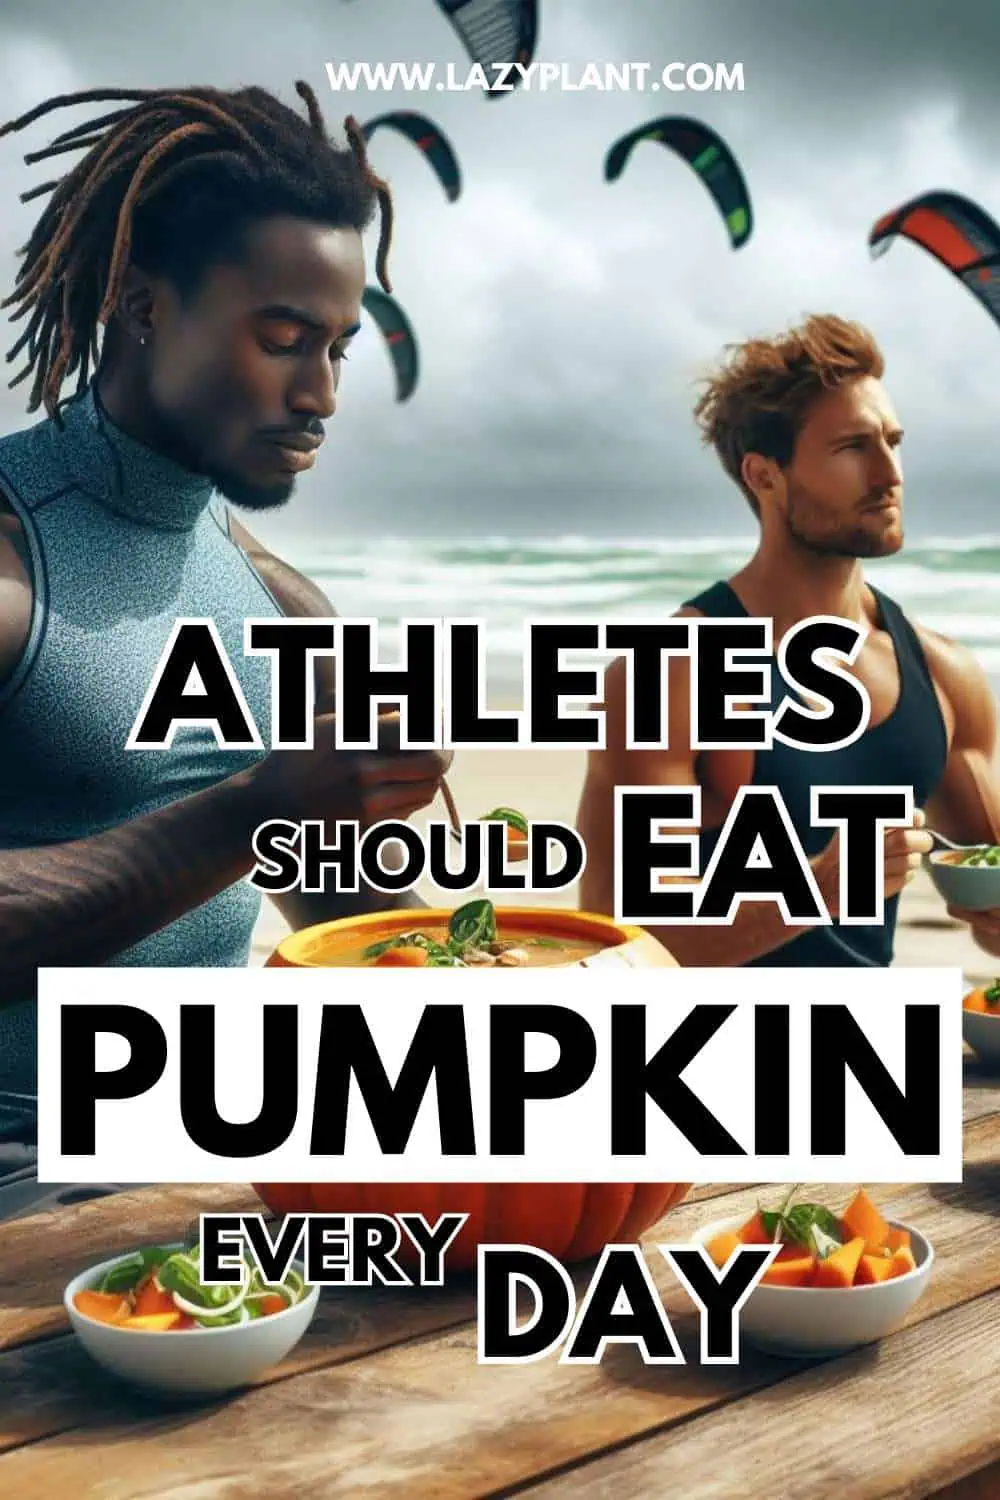 Athletes should eat Pumpkin seeds daily